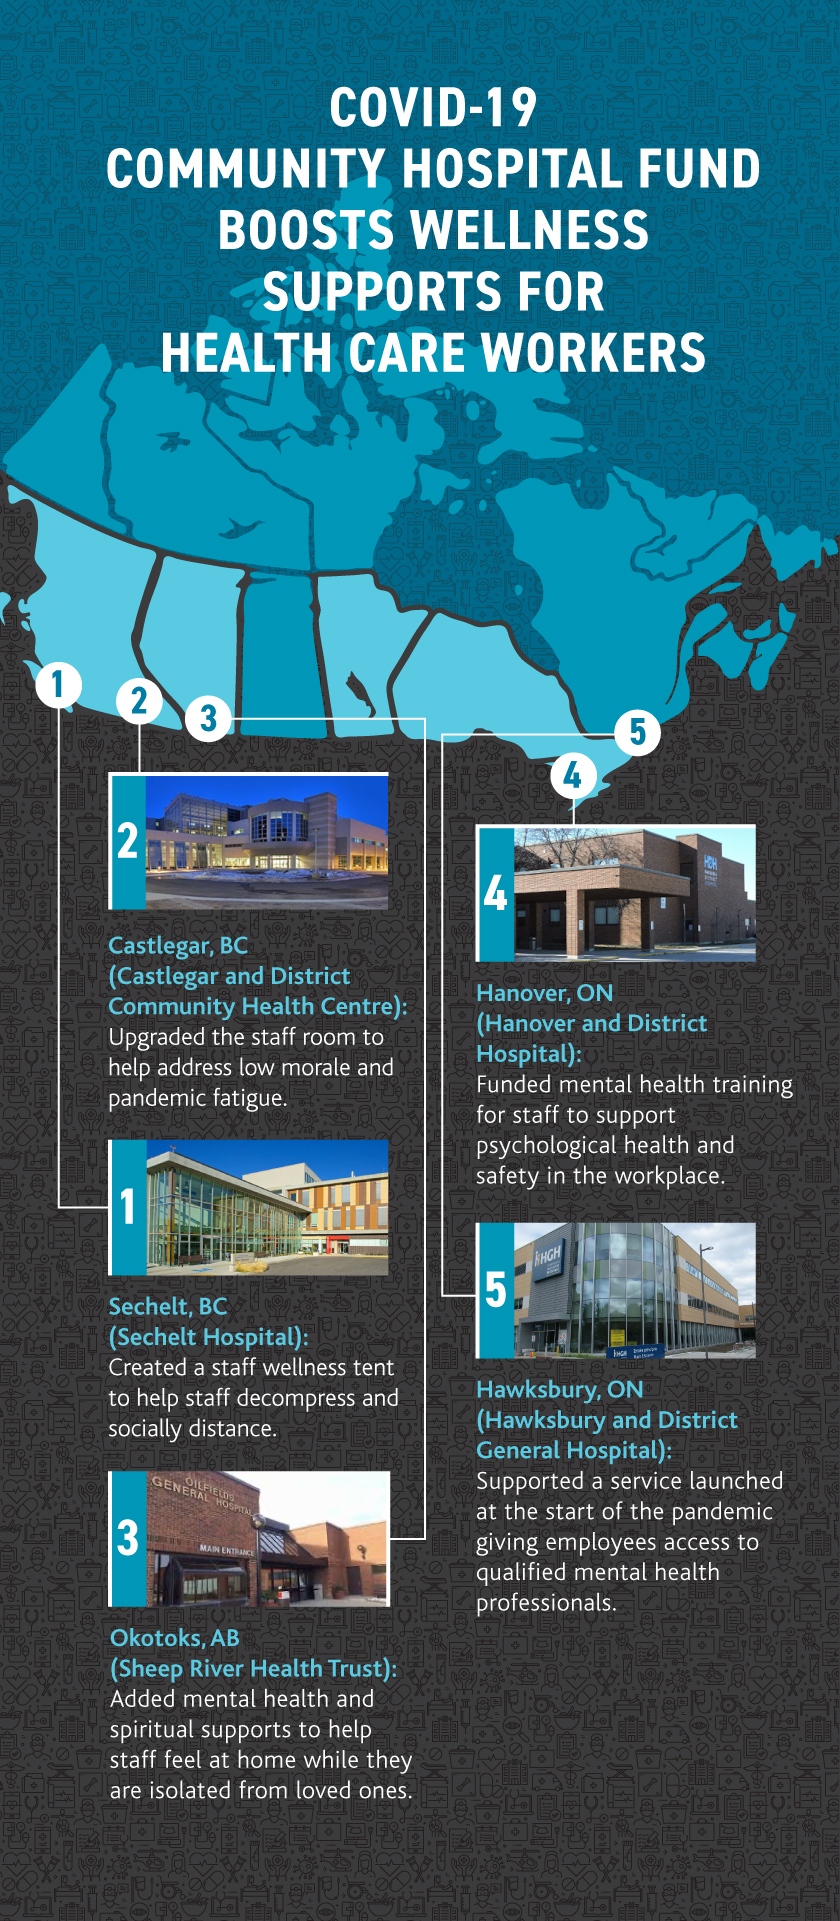 Infographic showing five hospitals across Canada implementing different wellness support programs. At Sechelt Hospital, staff created a staff wellness tent to decompress and socially distance. At Castlegar and District Community Health Centre in BC, staff upgraded the staff room to help address pandemic fatigue. At Sheep River Health Trust in Okotoks, Alta., staff added mental health and spiritual supports. Ontario’s Hanover and District Hospital Funded implemented mental health training for staff to support psychological health and safety in the workplace. Hawksbury and District General Hospital was able to support a service launched at the start of the pandemic giving employees access to qualified mental health professionals.